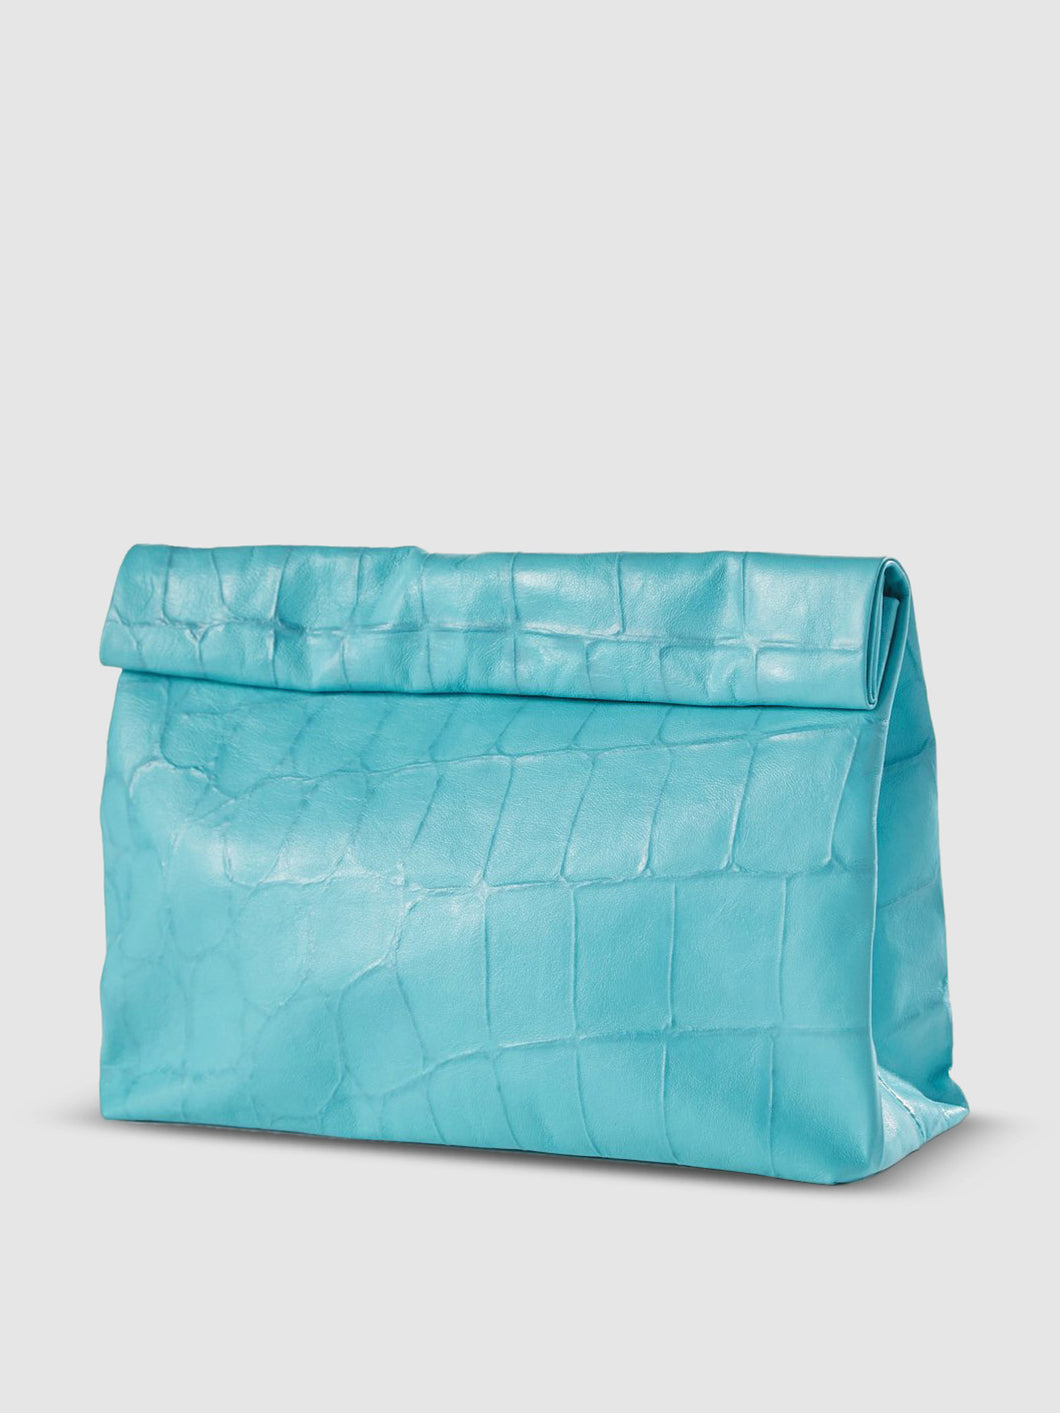 The Lunch — Turquoise Croco - Limited Edition